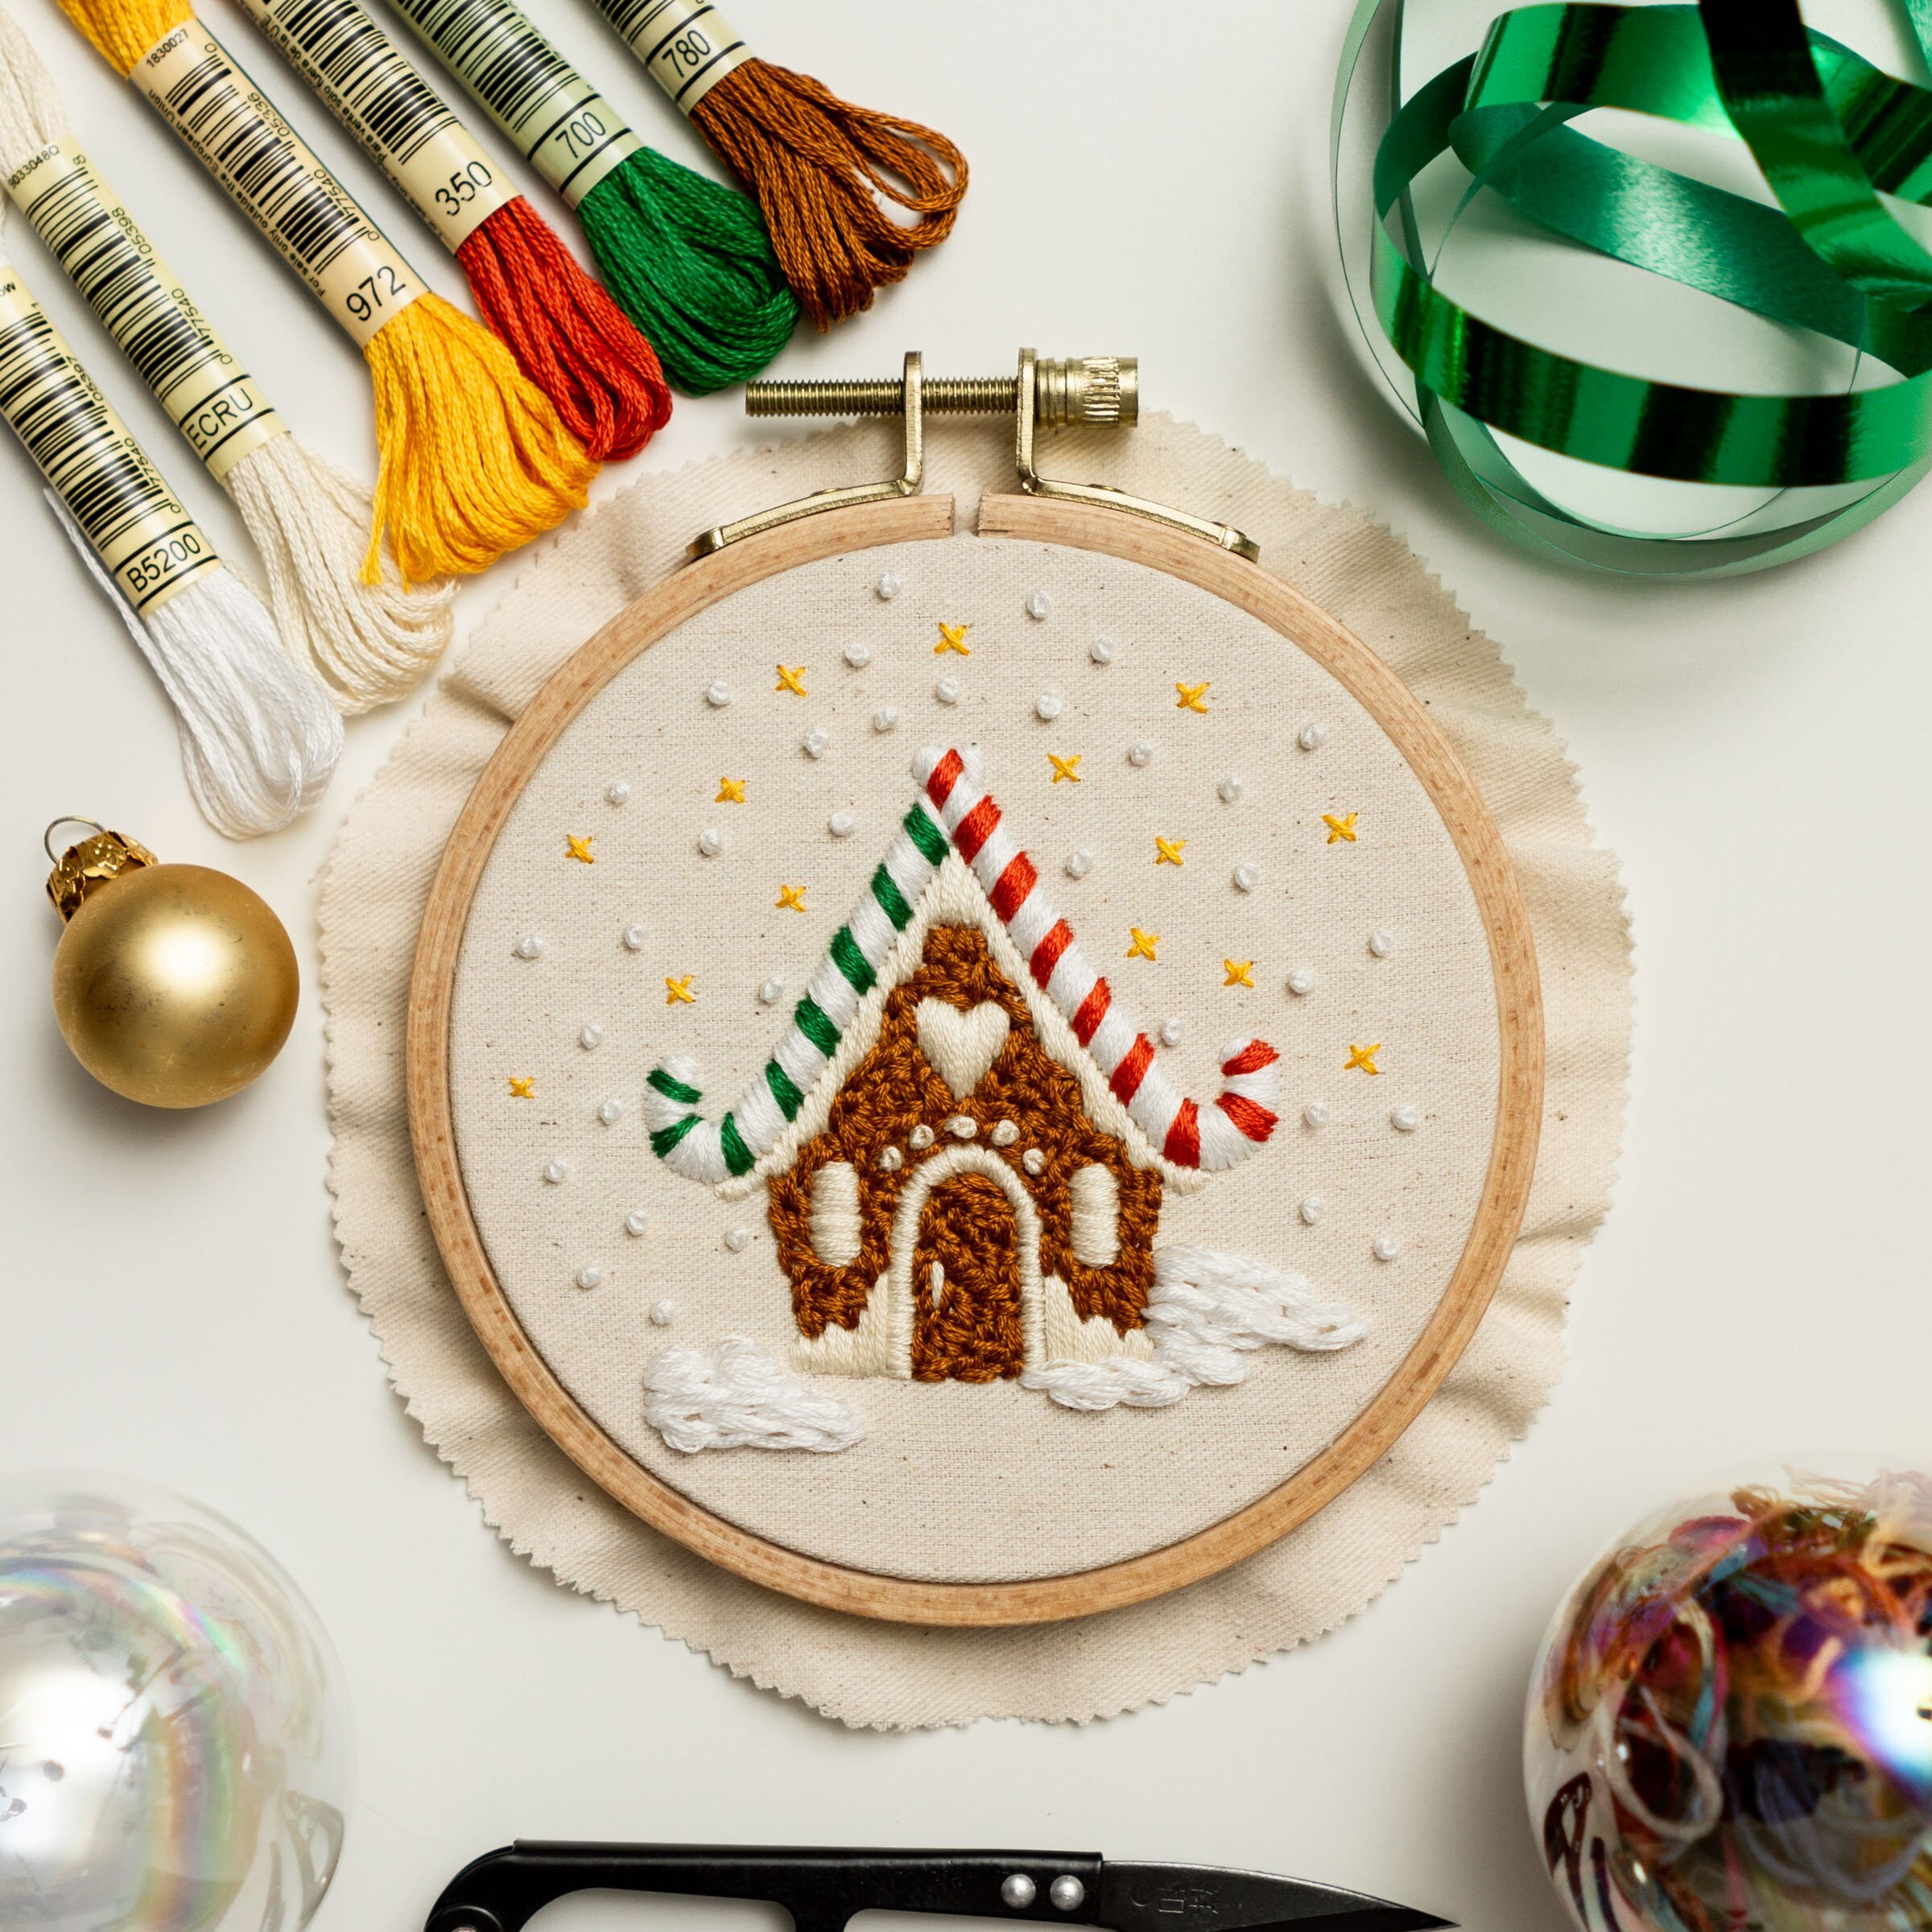 DIY Christmas 6 Mini Embroidery Hoop Decorations/earrings digital Pattern  Step by Step Festive Craft Guide PDF Only -  UK